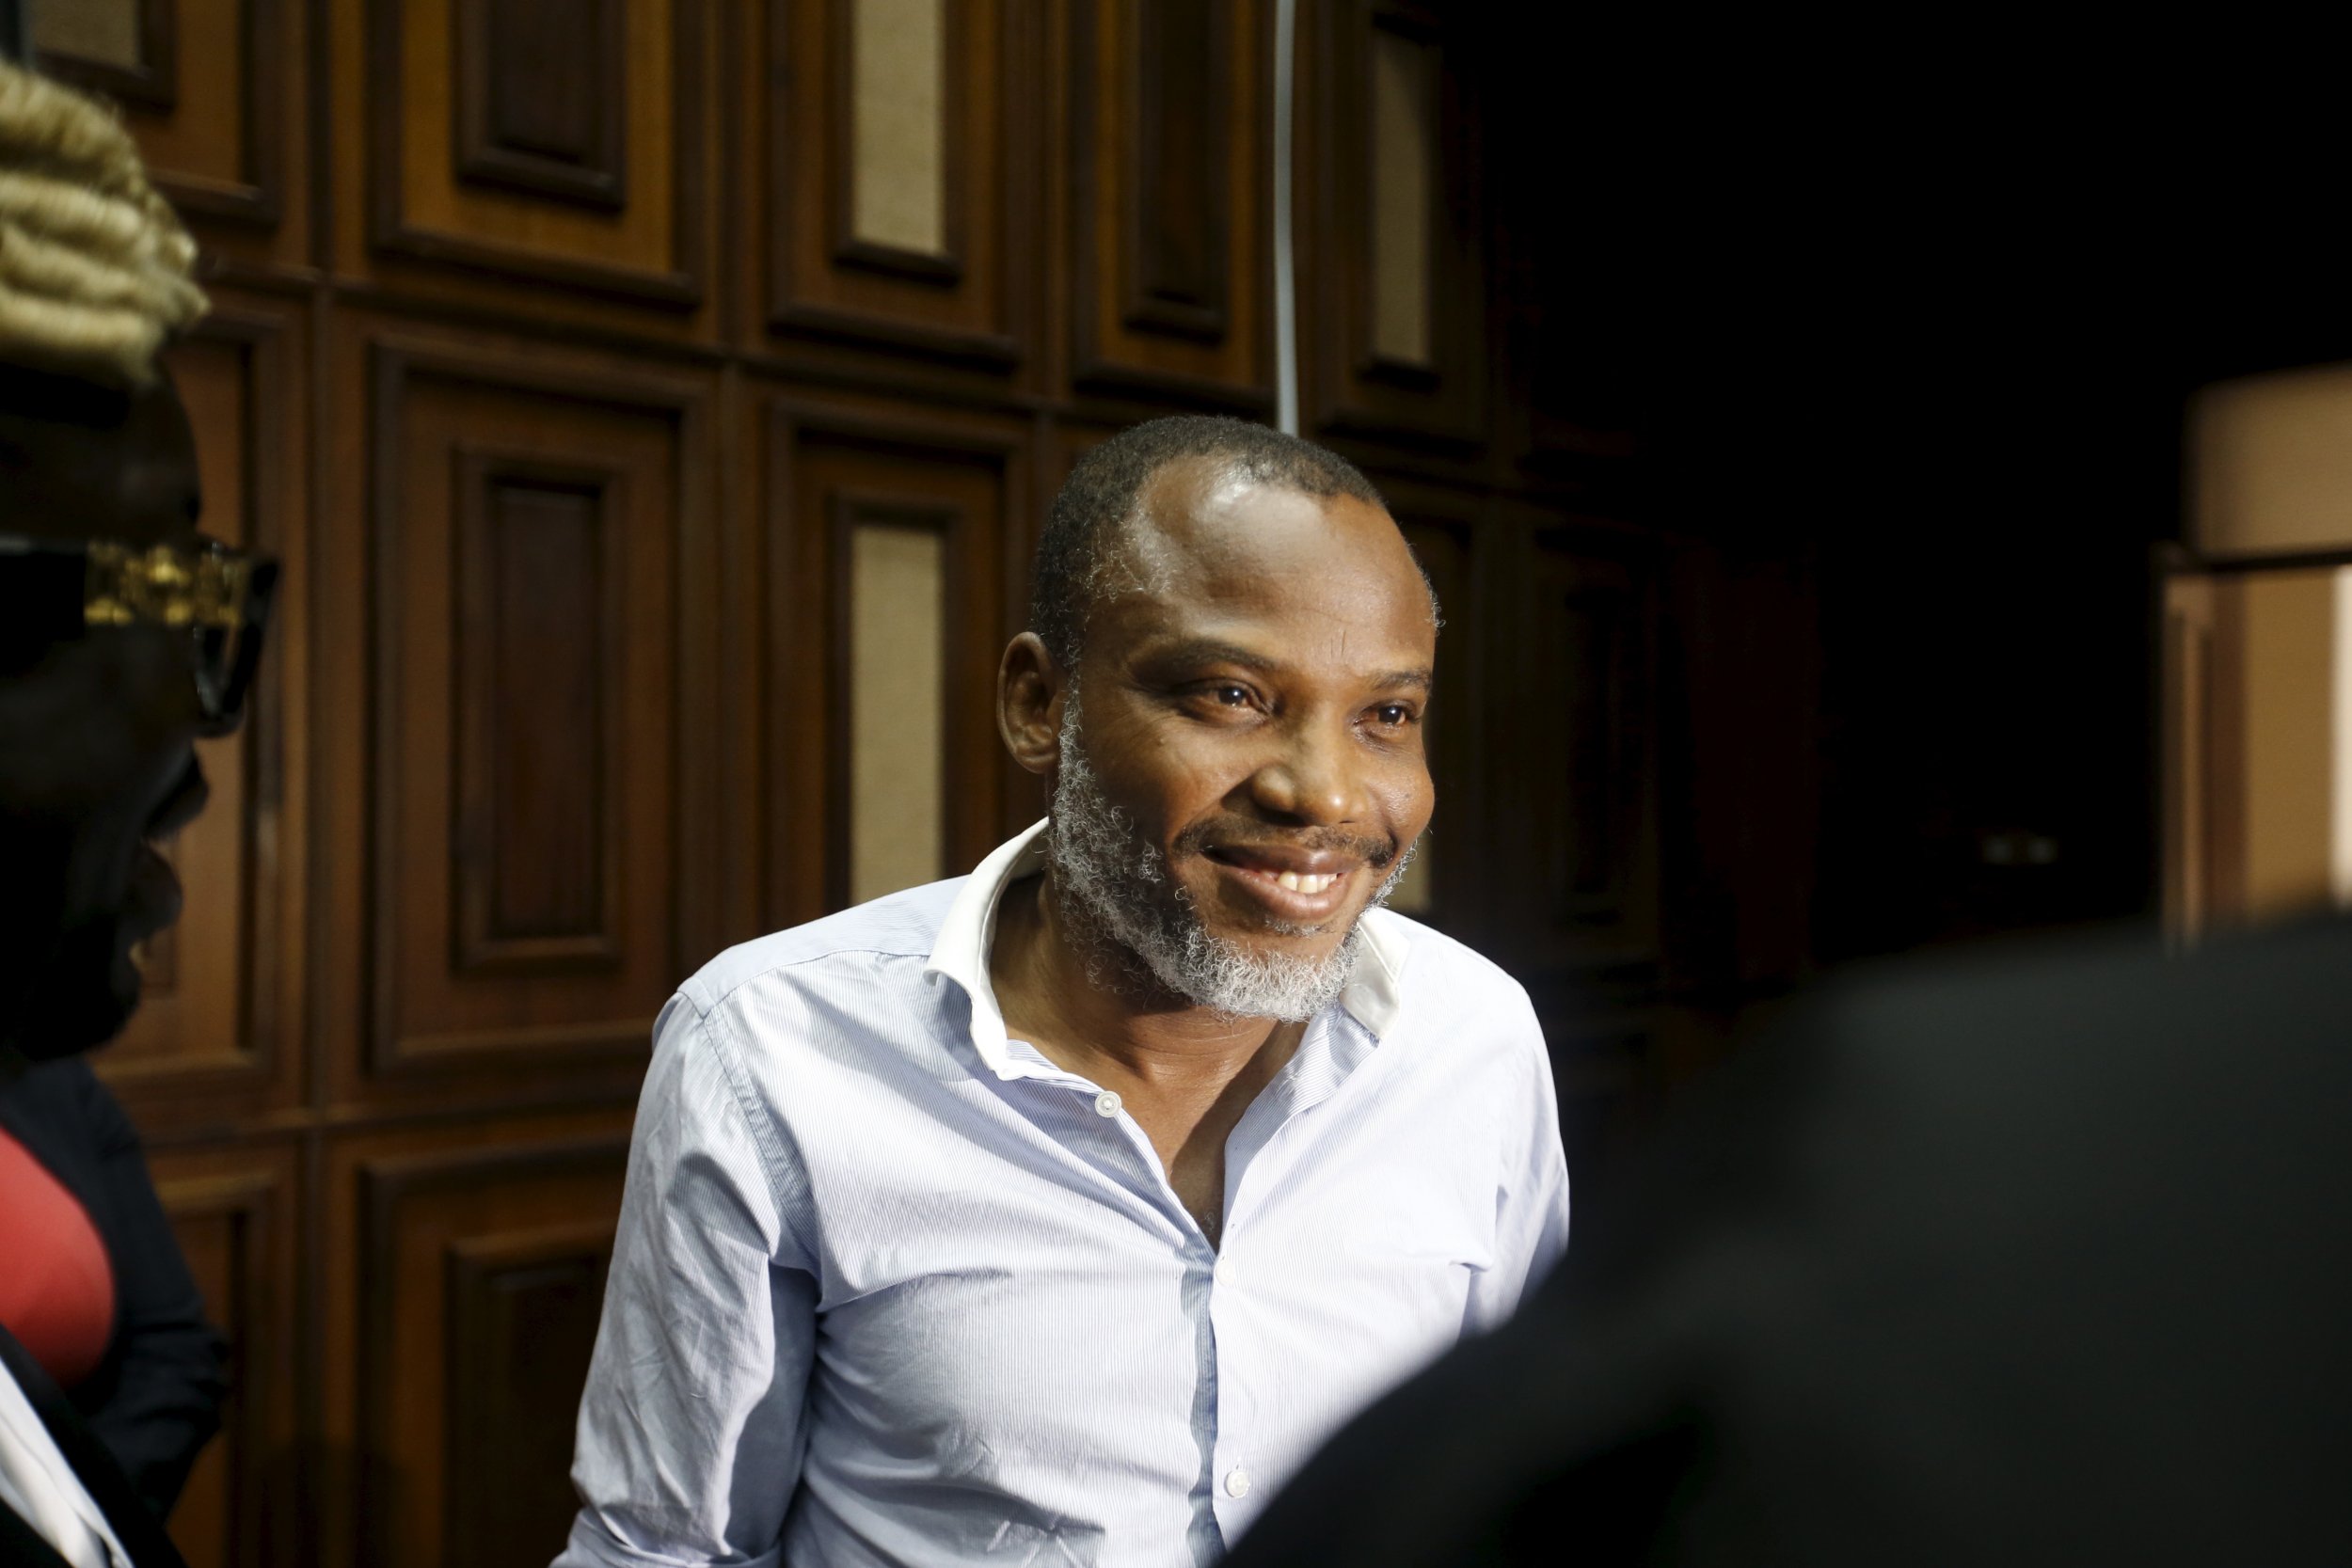 Nnamdi Kanu, a pro-Biafran activist, is standing trial for treason on Tuesday.